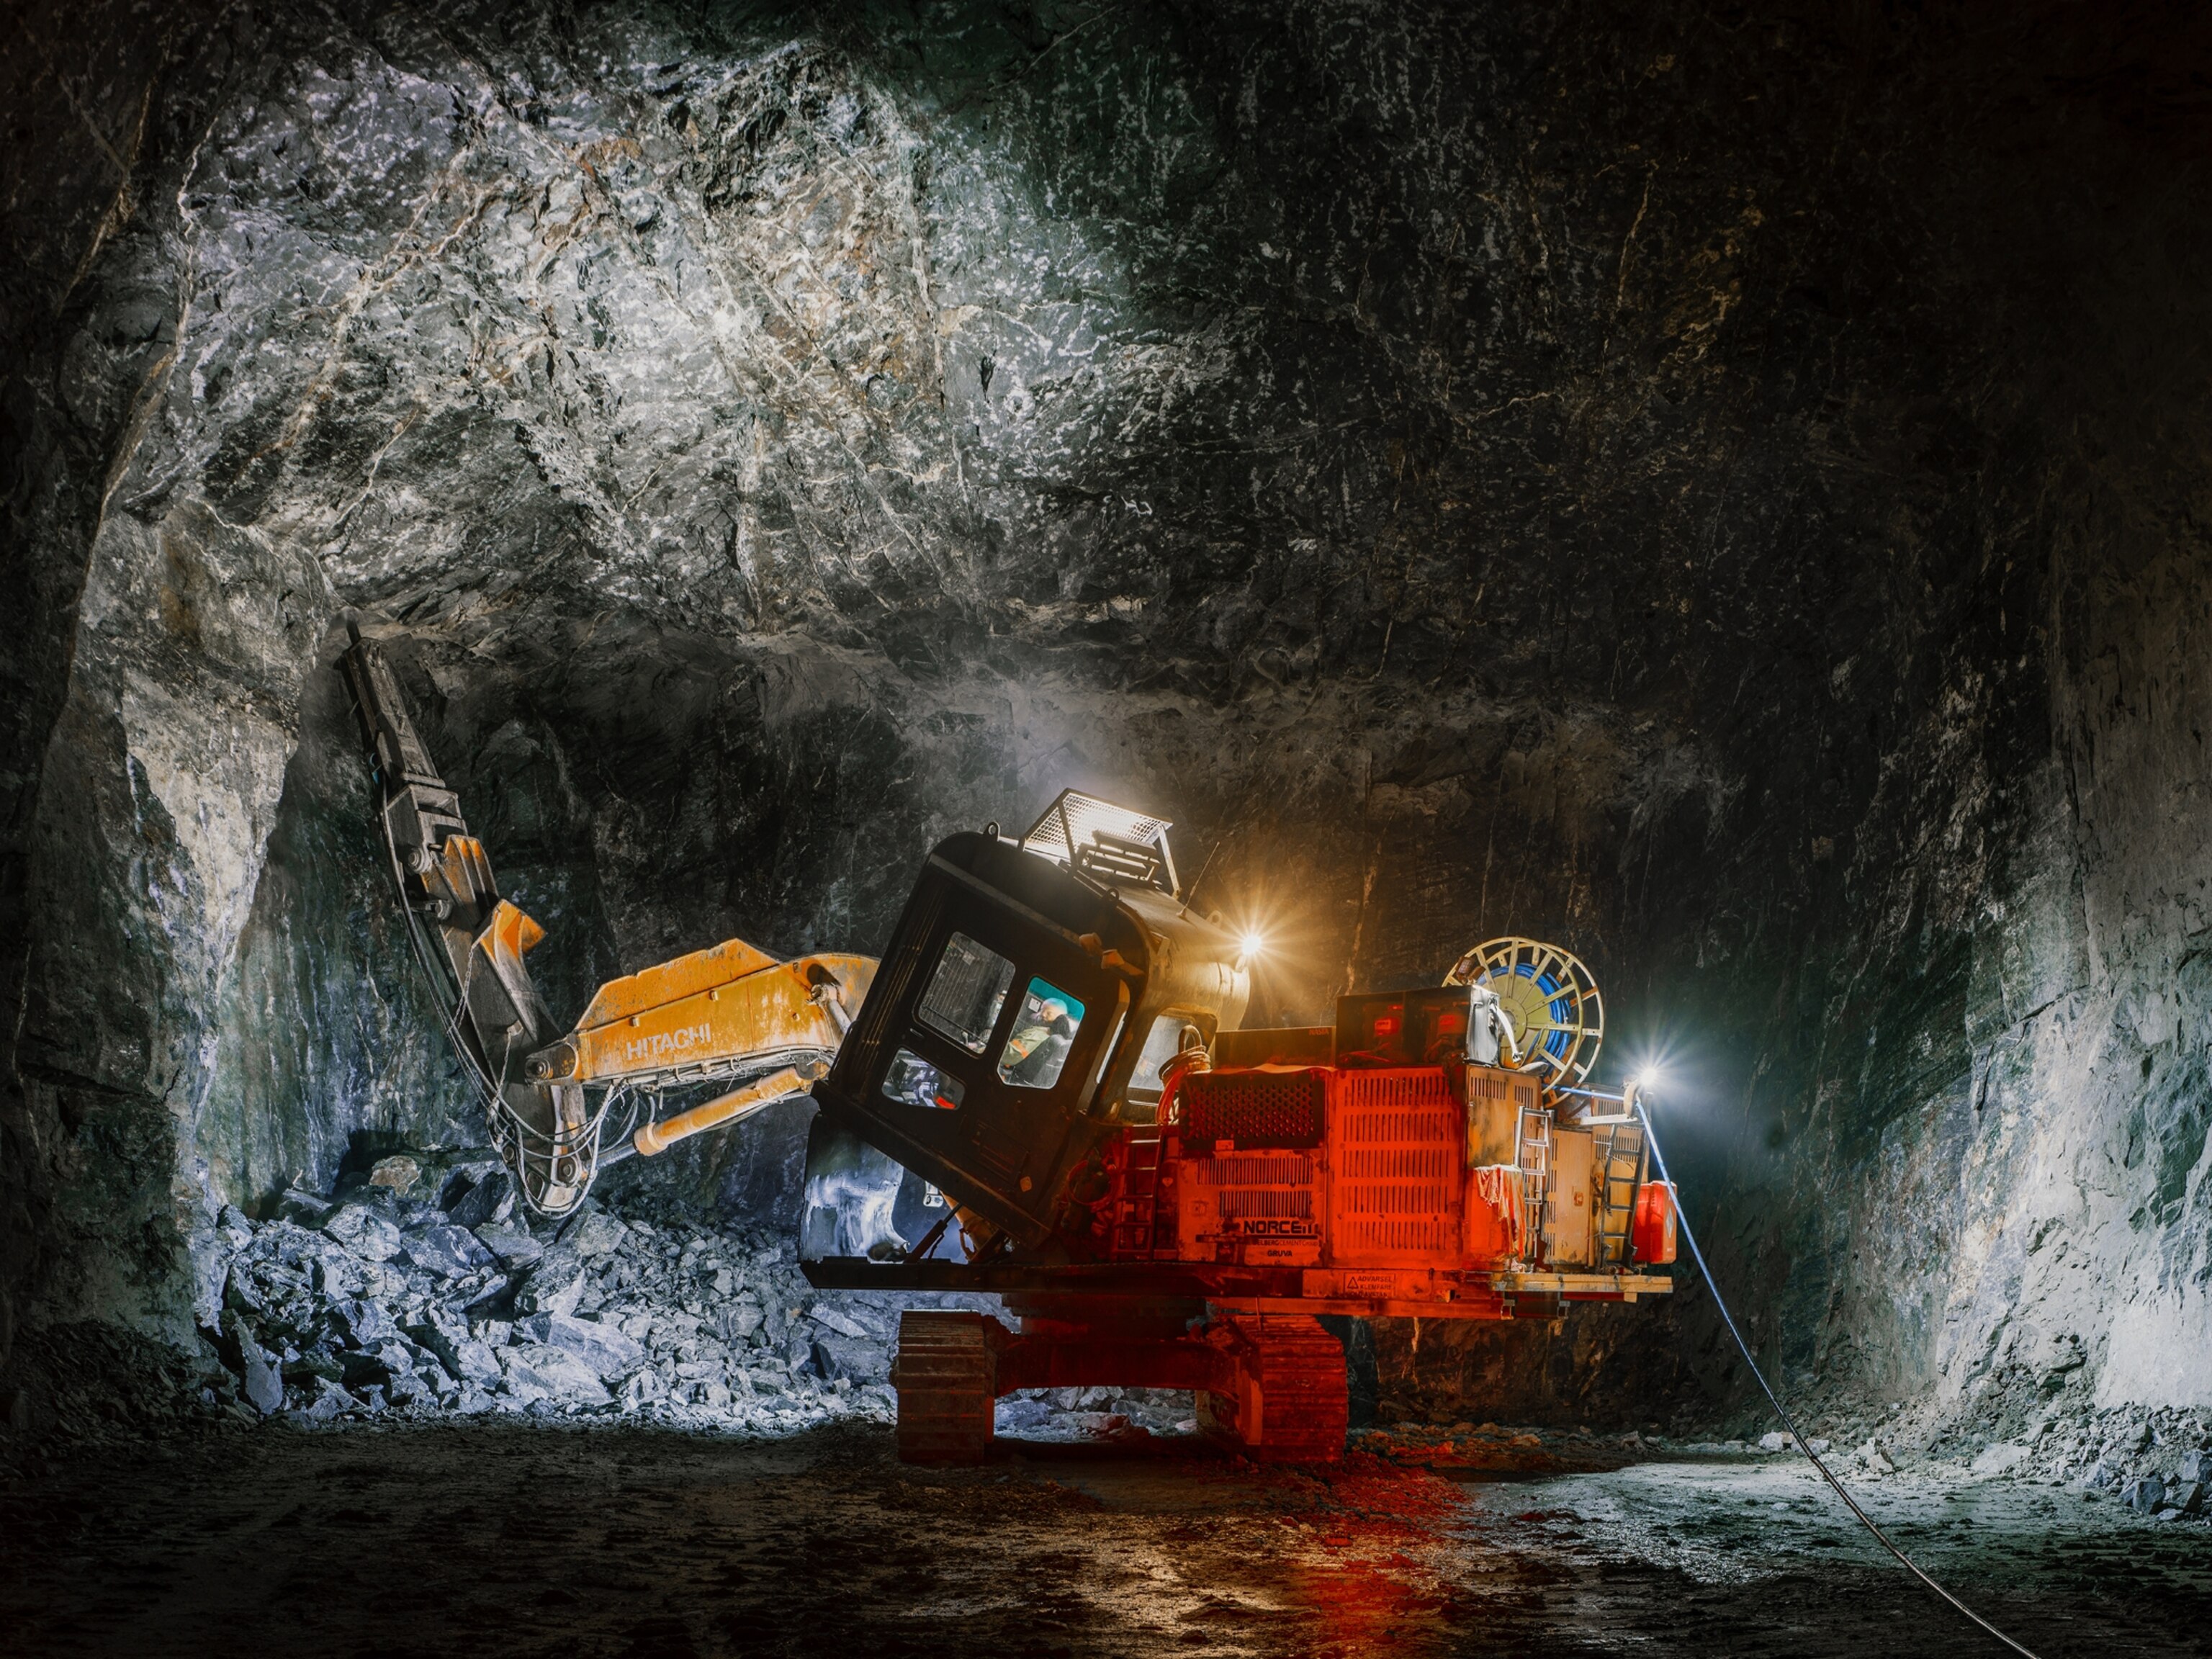 Drilling operations inside the mine.